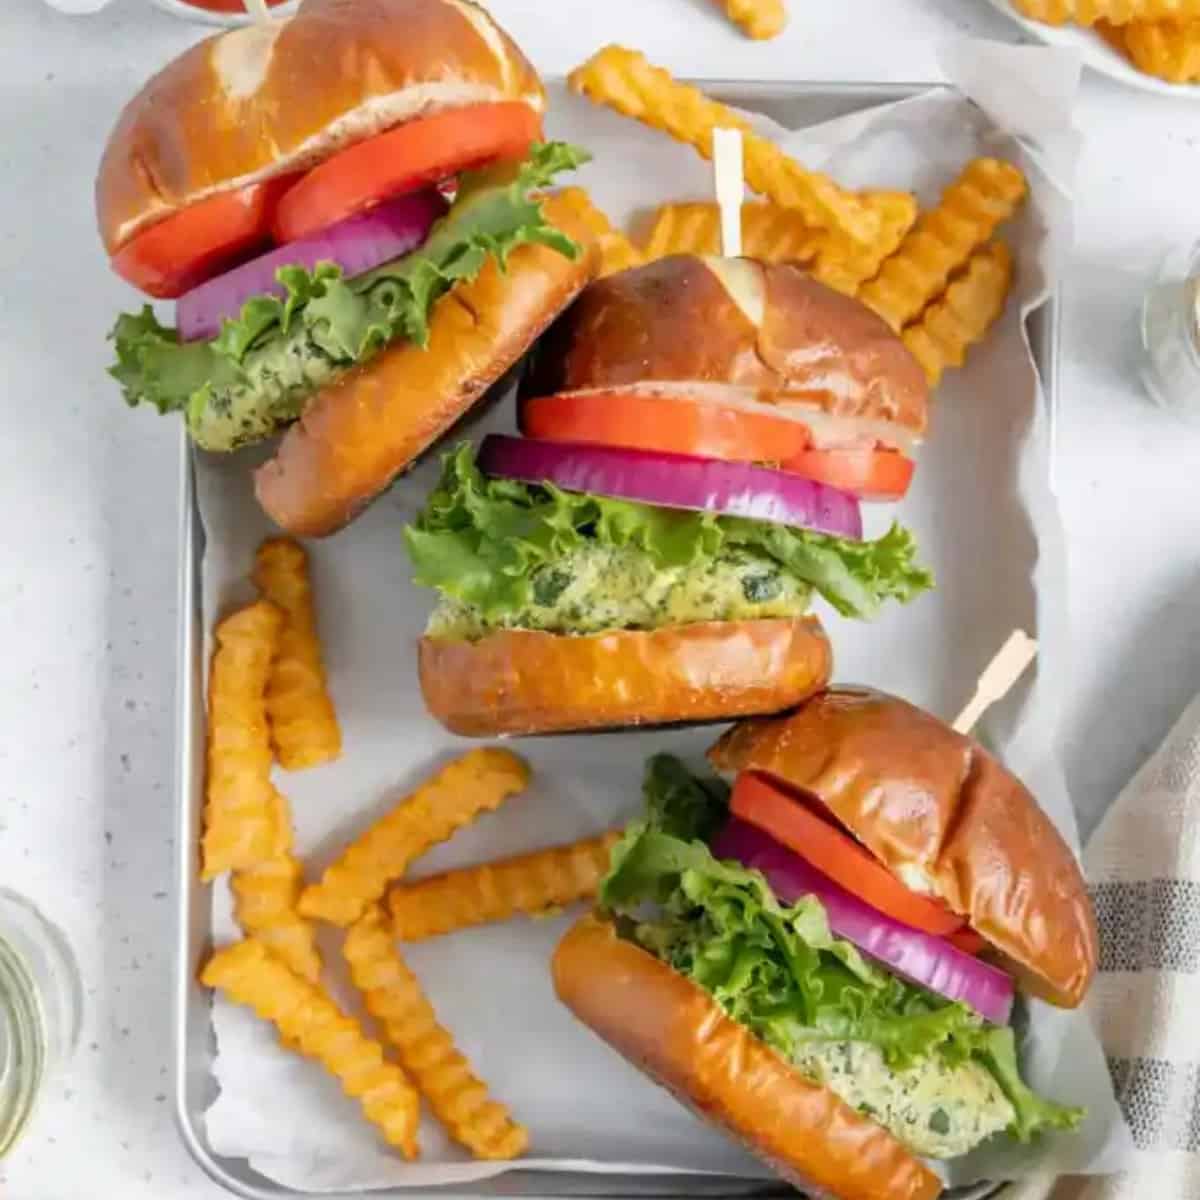 three haphazzardly placed tofu burgers on a baking tray with fries.